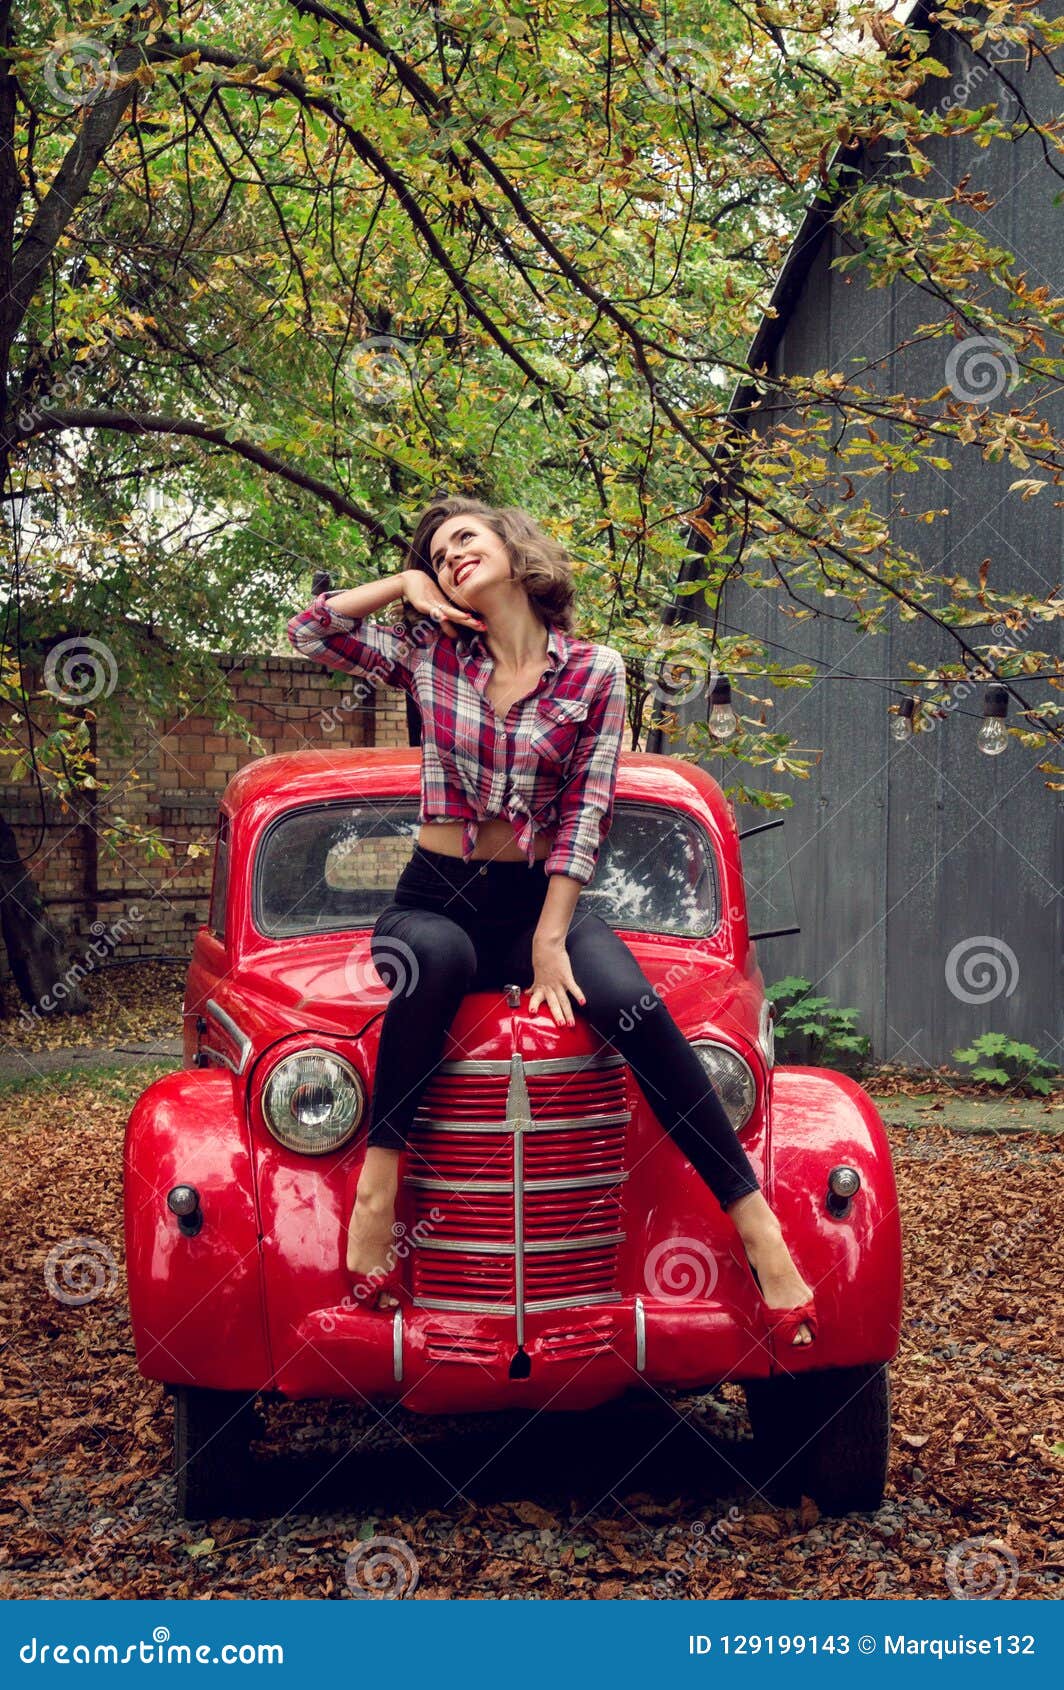 Pinup Girl With Car Stock Photo - Download Image Now - iStock